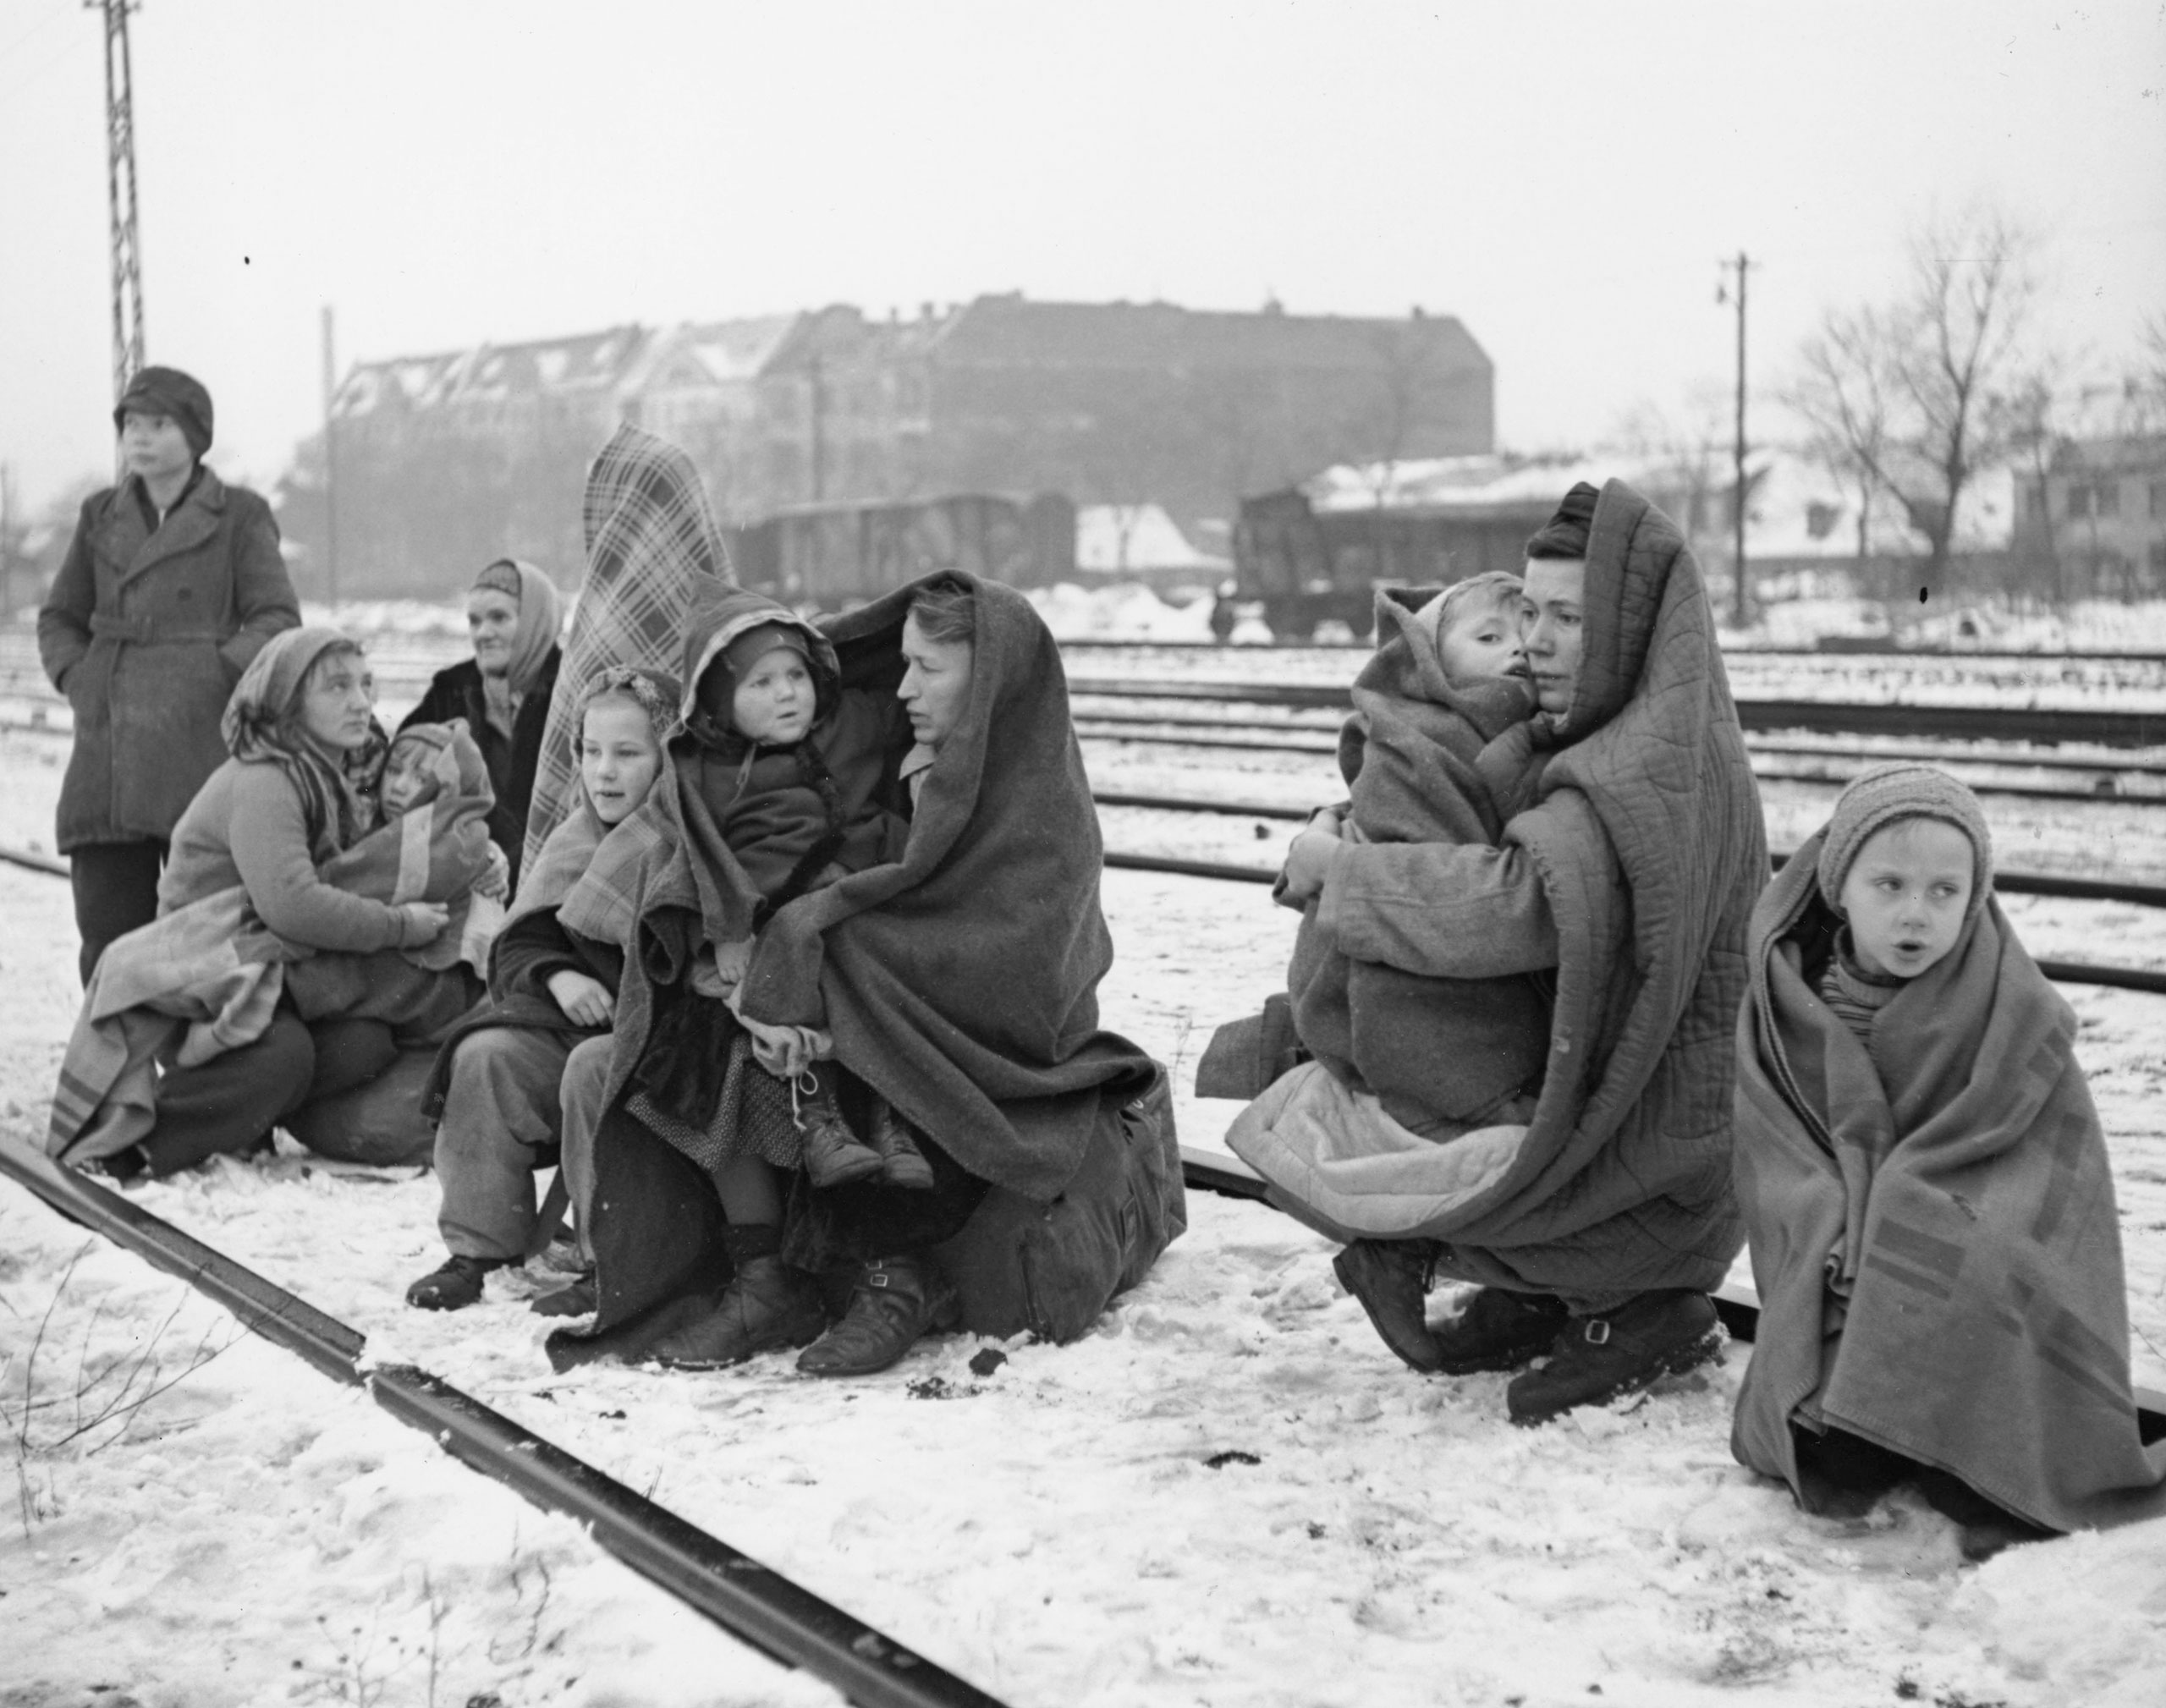 The only survivors of 150 Polish people who walked from Lodz, Poland to Berlin Huddle in blankets, on December 14, 1945. They are waiting by a railway track hoping to be picked up by a British army train and given help.